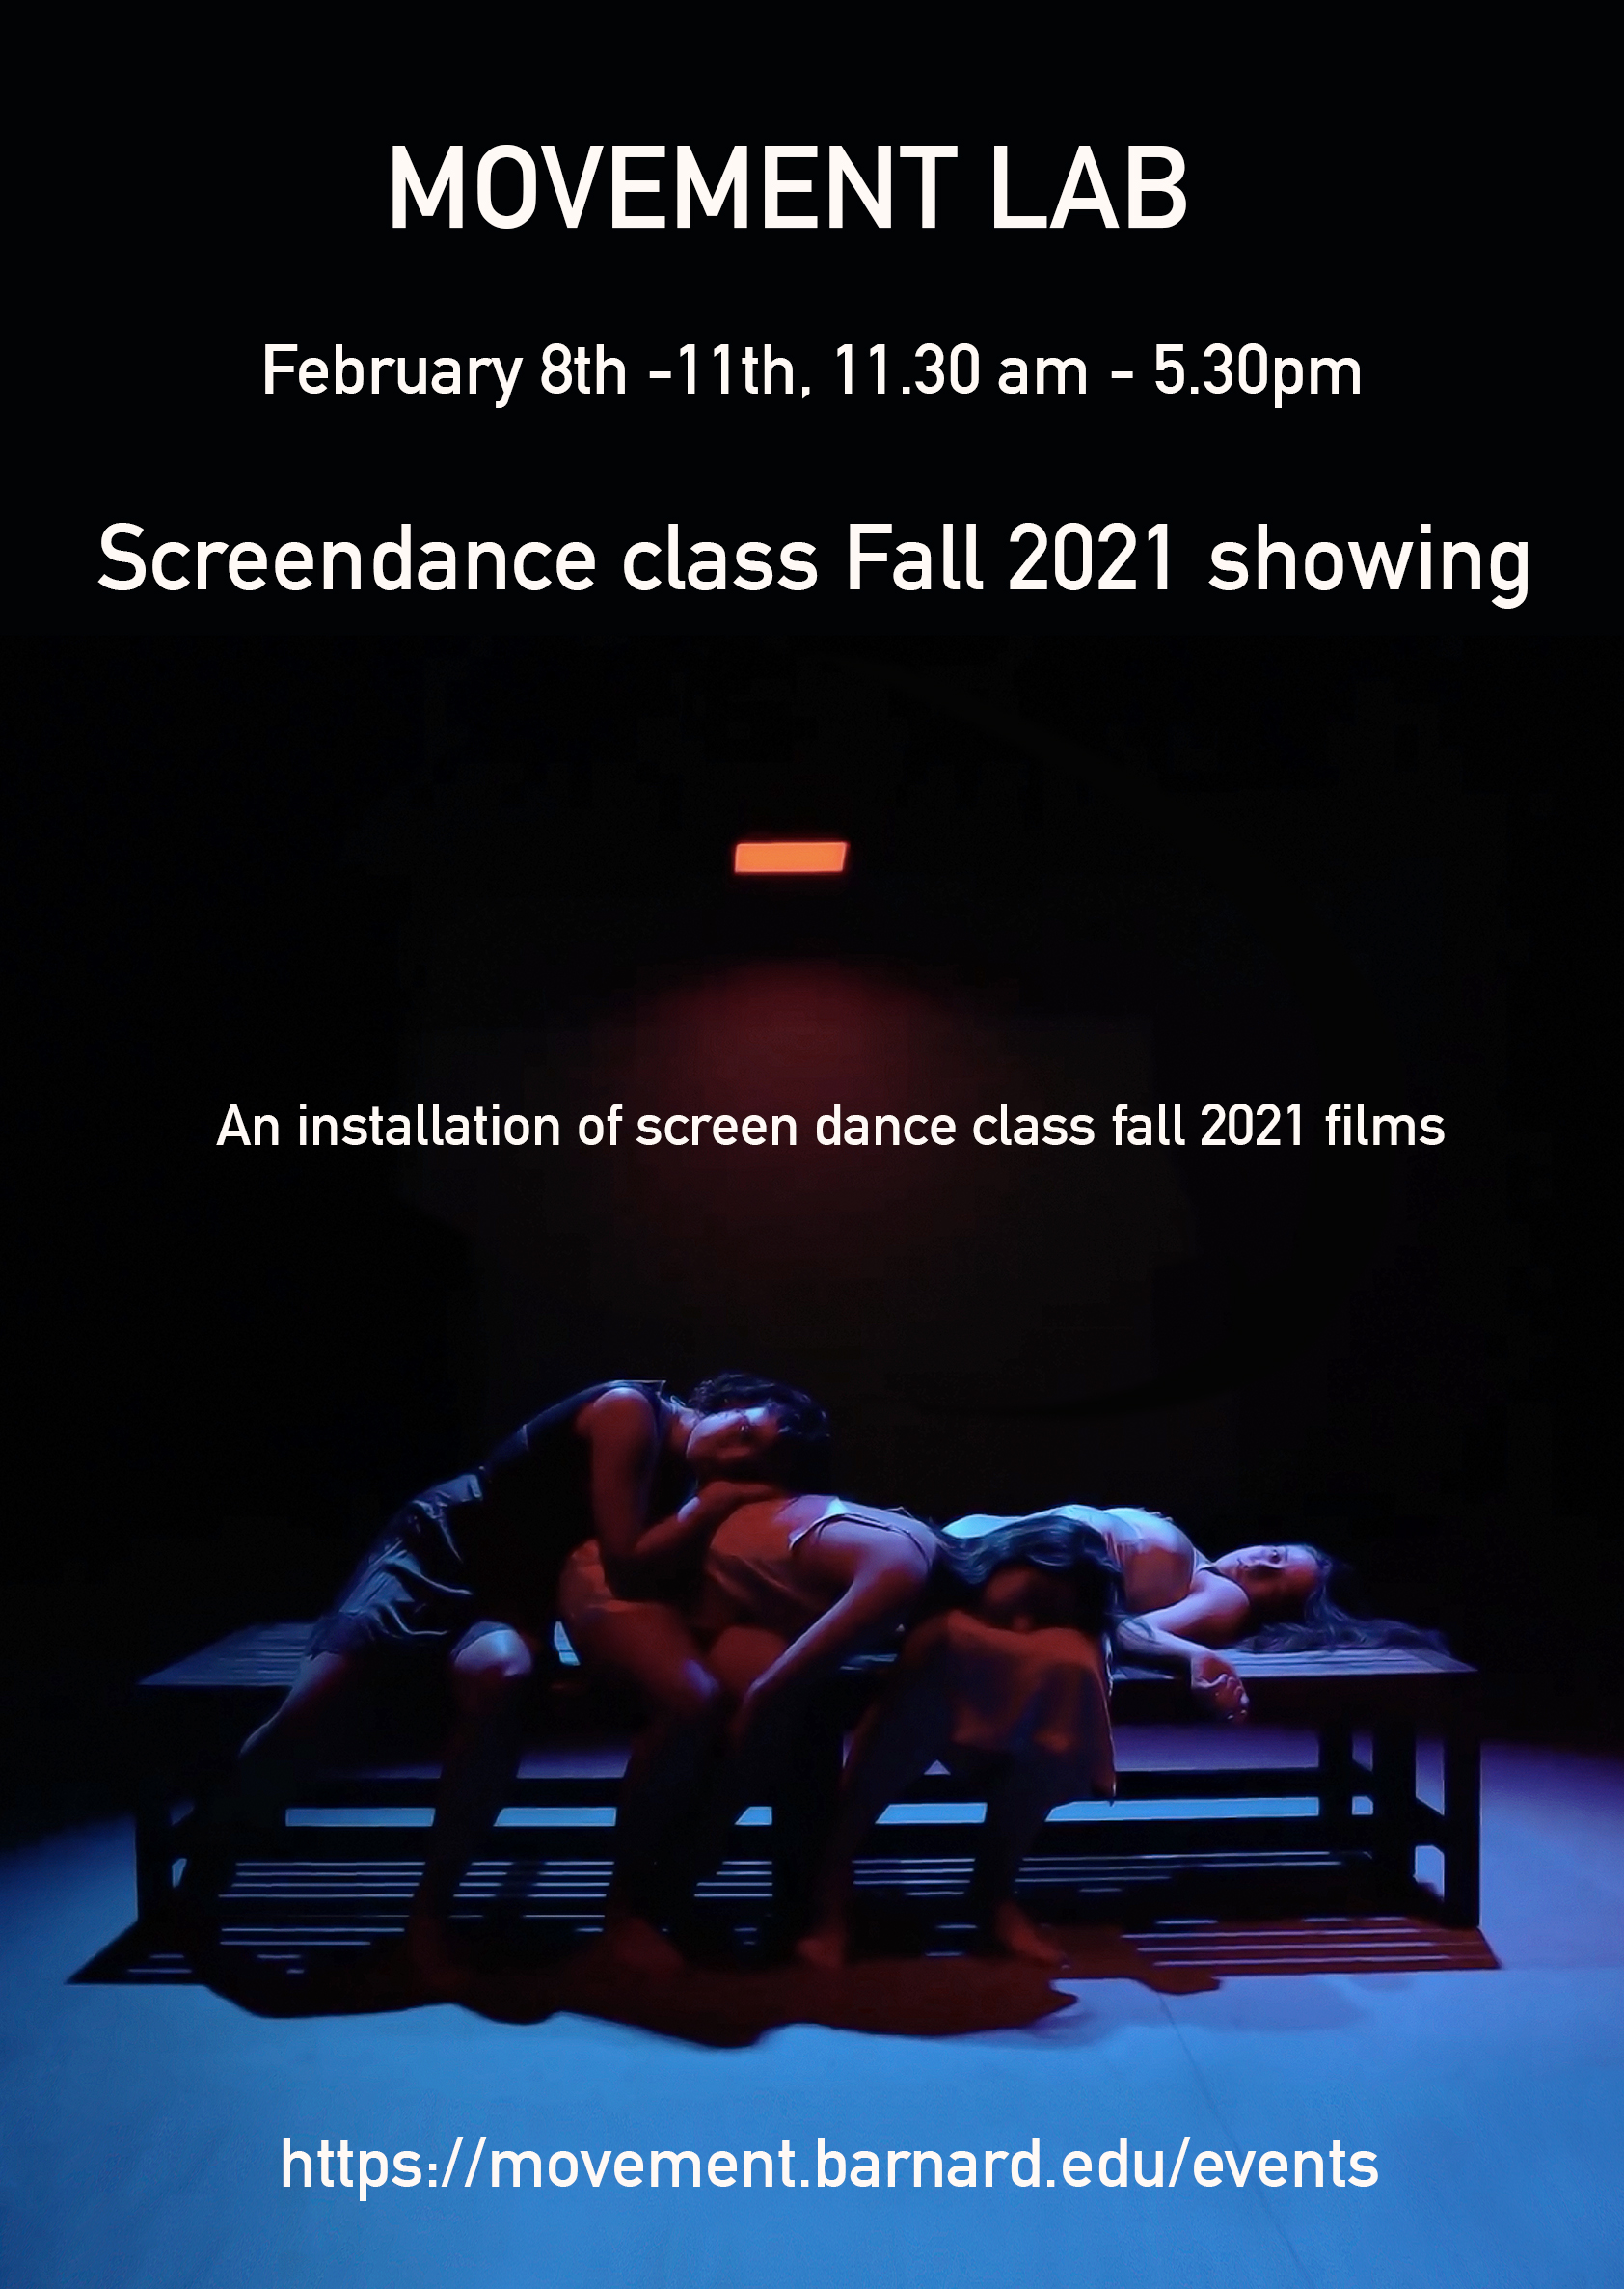 A poster for the Screendance Installation featuring three people lying on top of each other on a bench